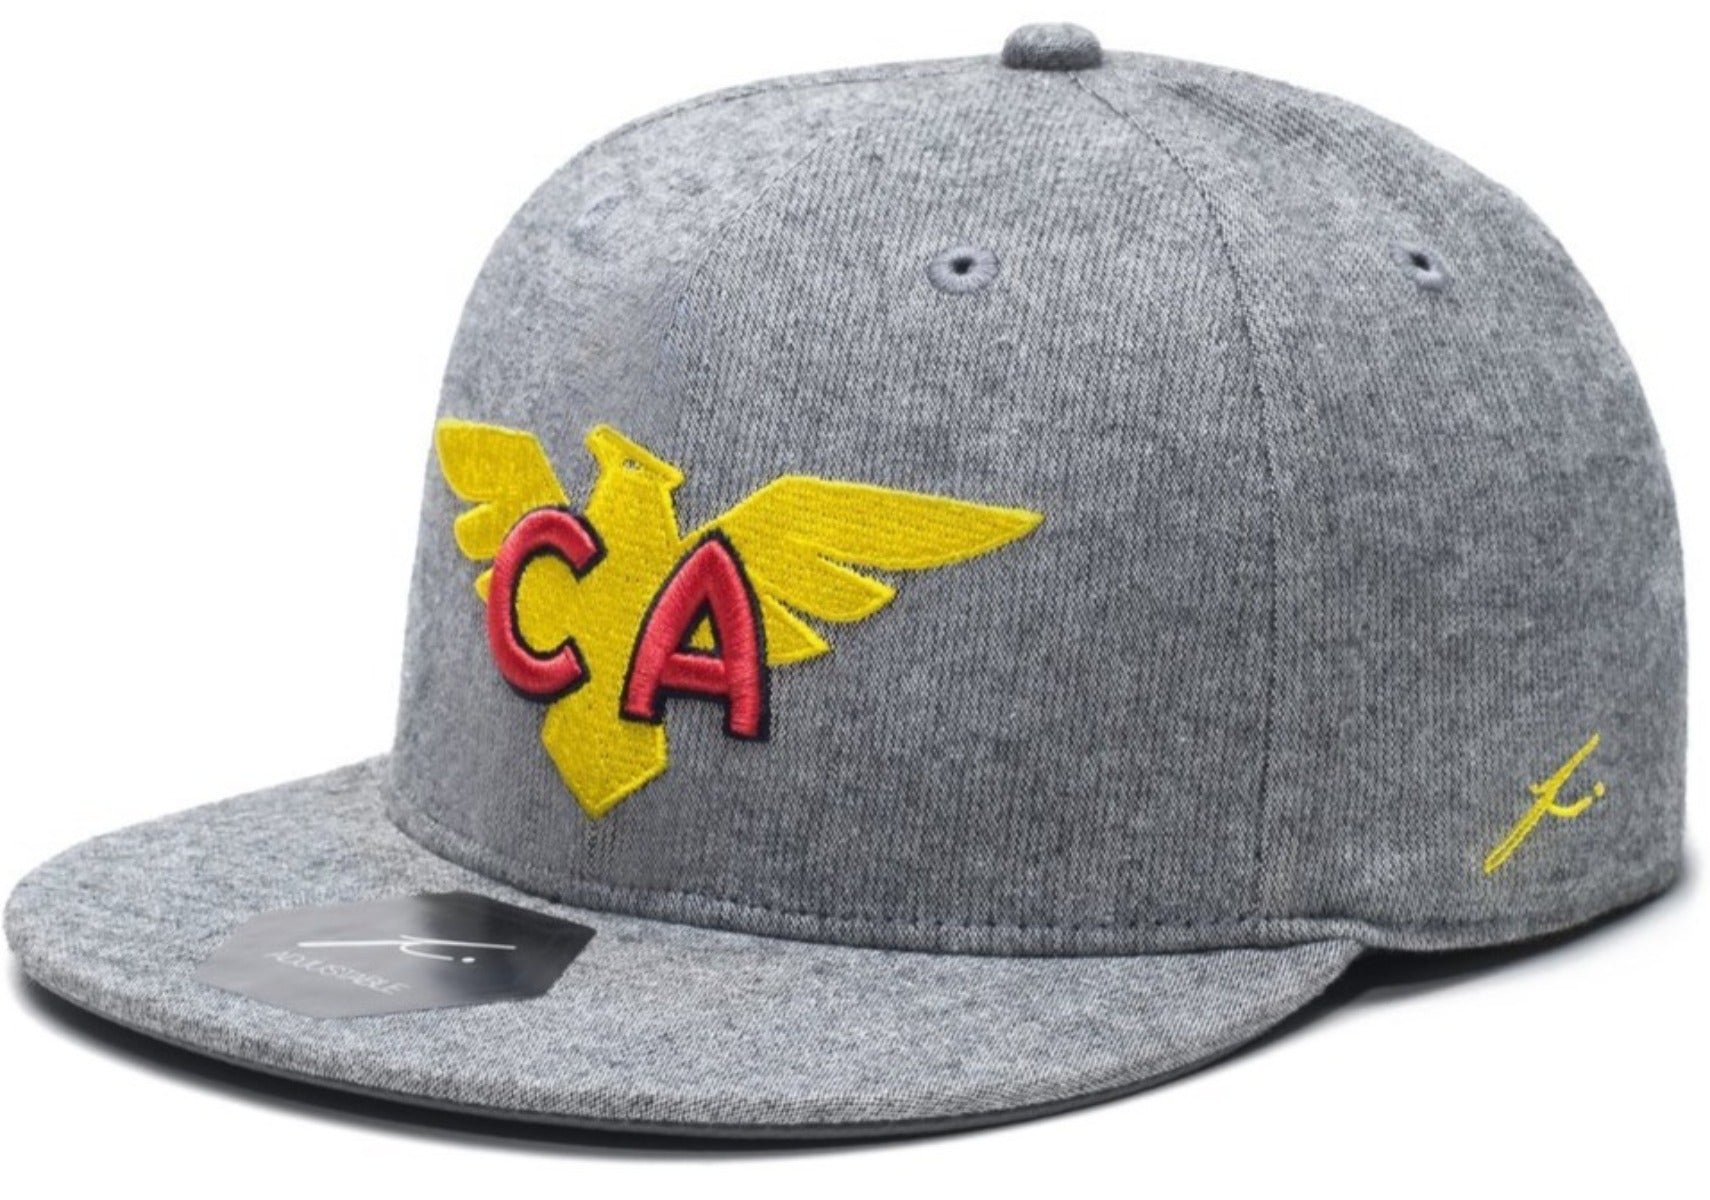 FI COLLECTION CLUB AMERICA STACK SNAPBACK HAT